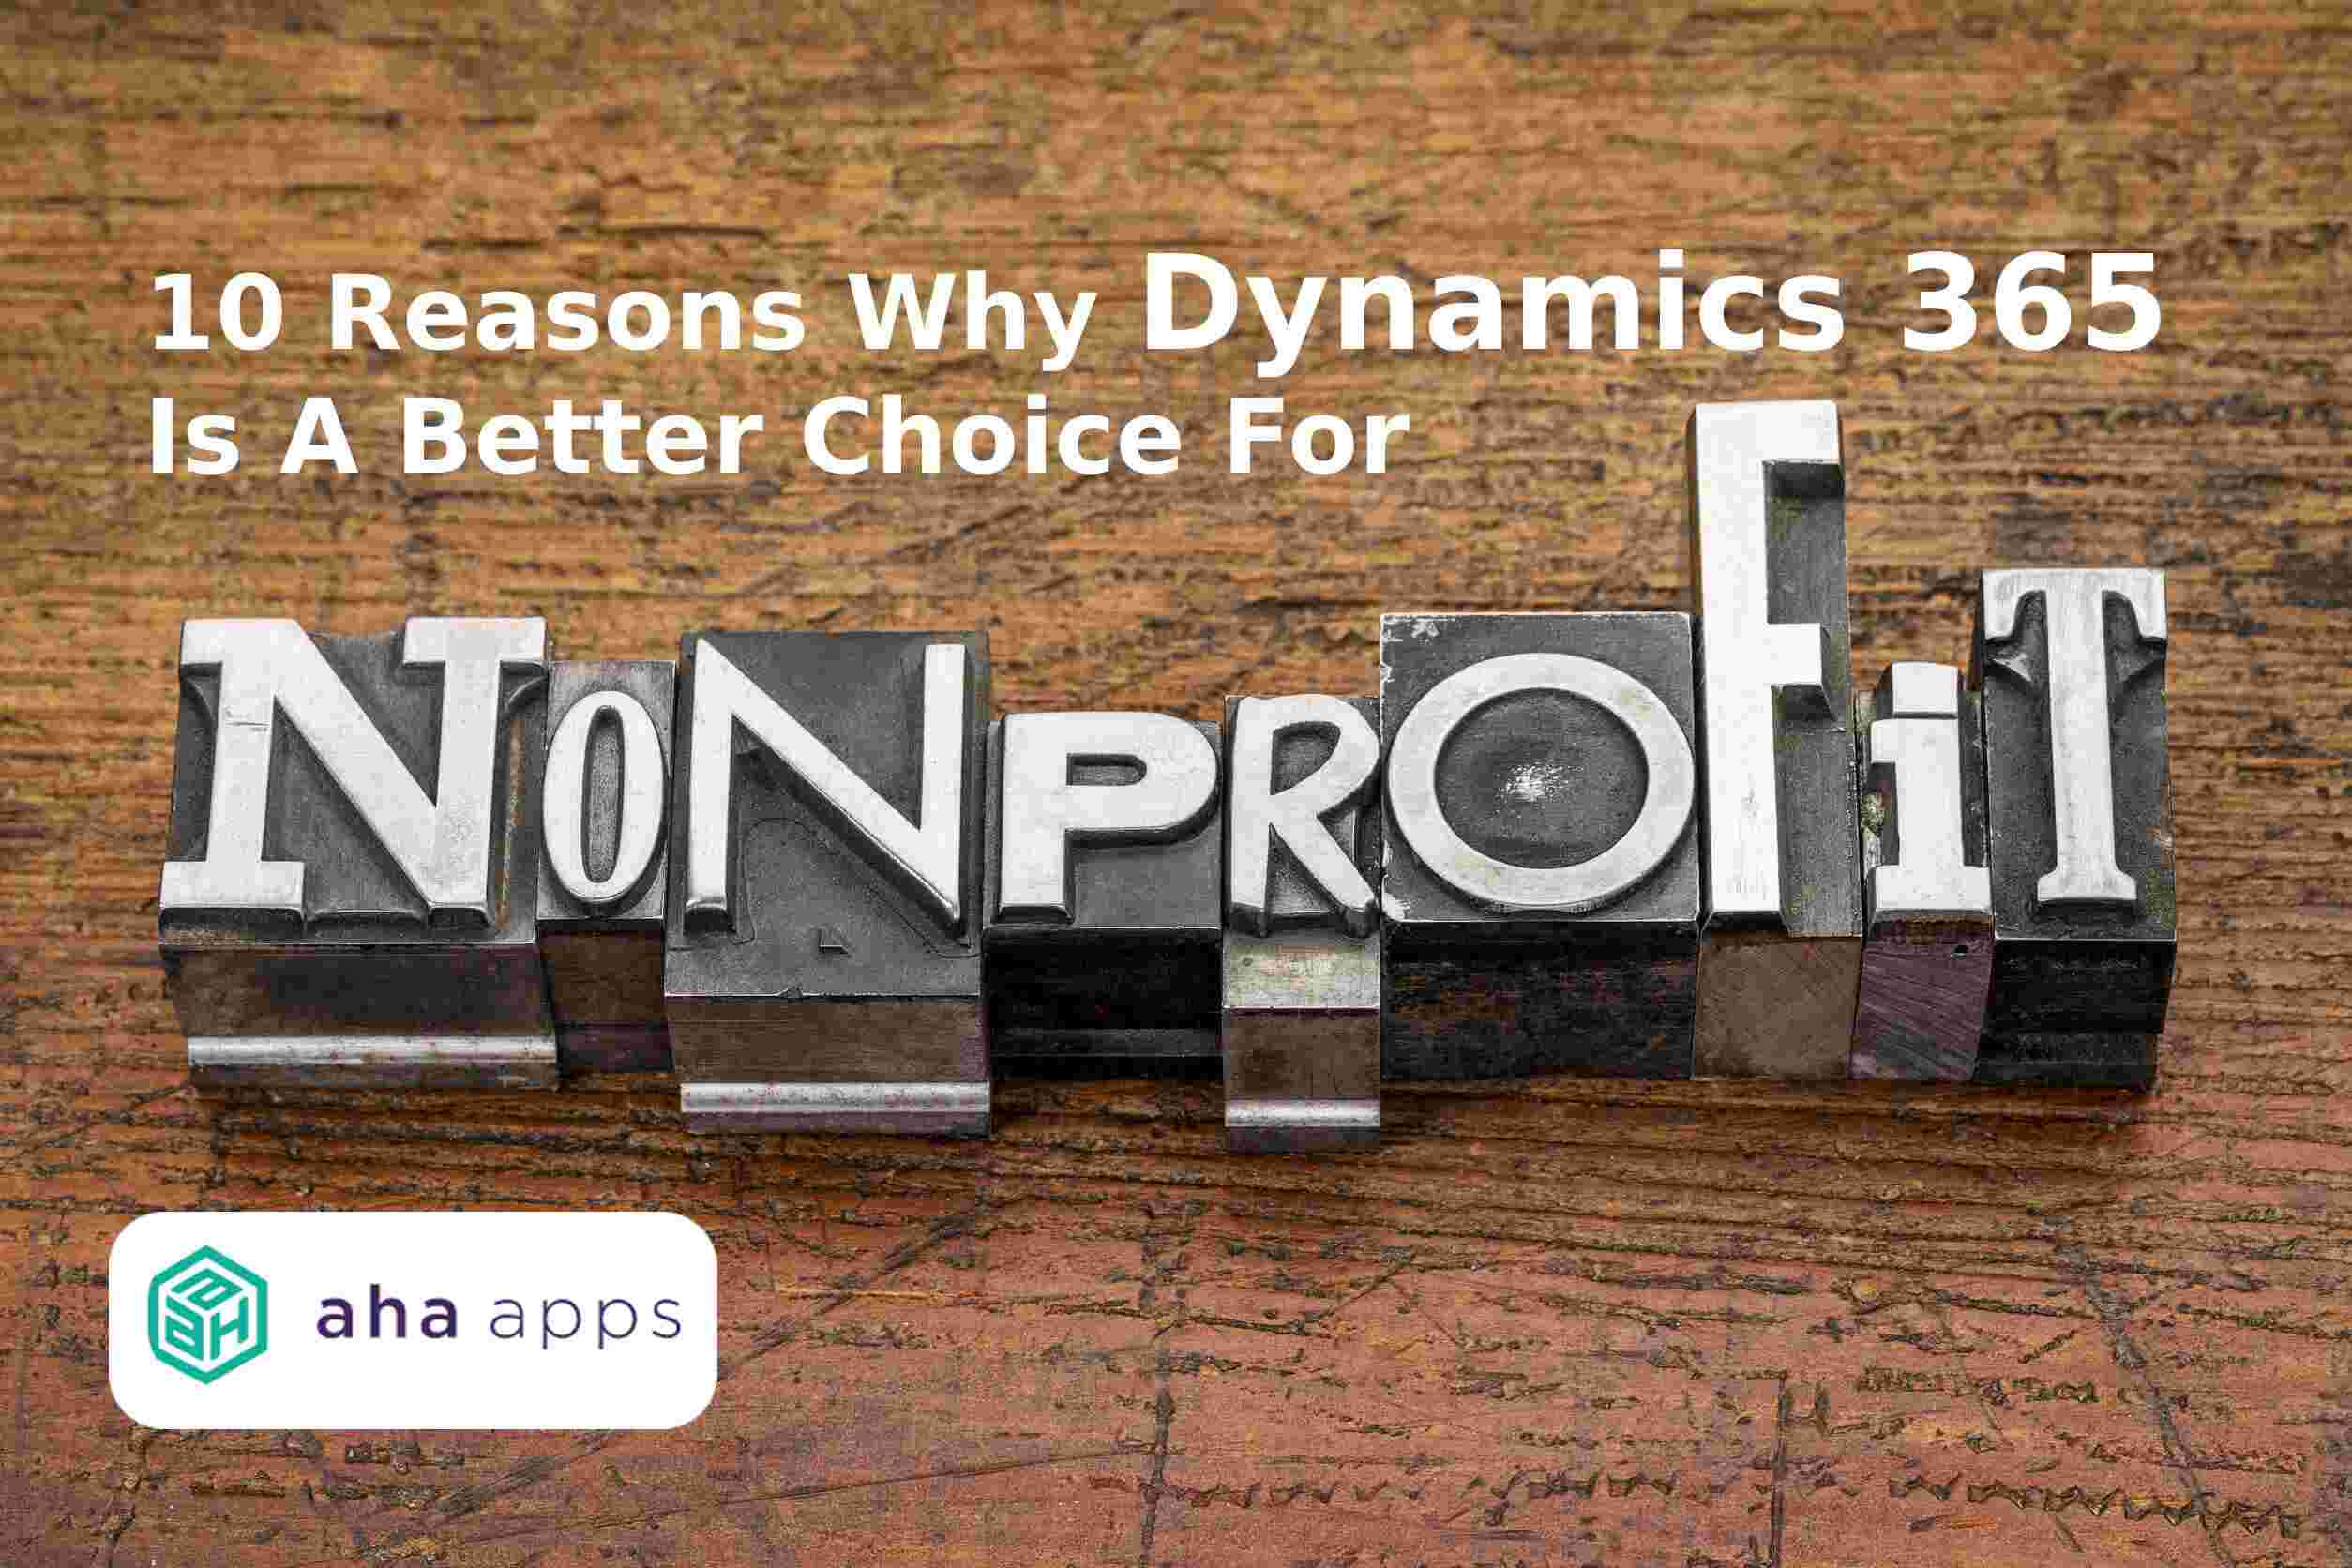 10 reasons why Dynamics 365 is a better choice for nonprofits - AhaApps